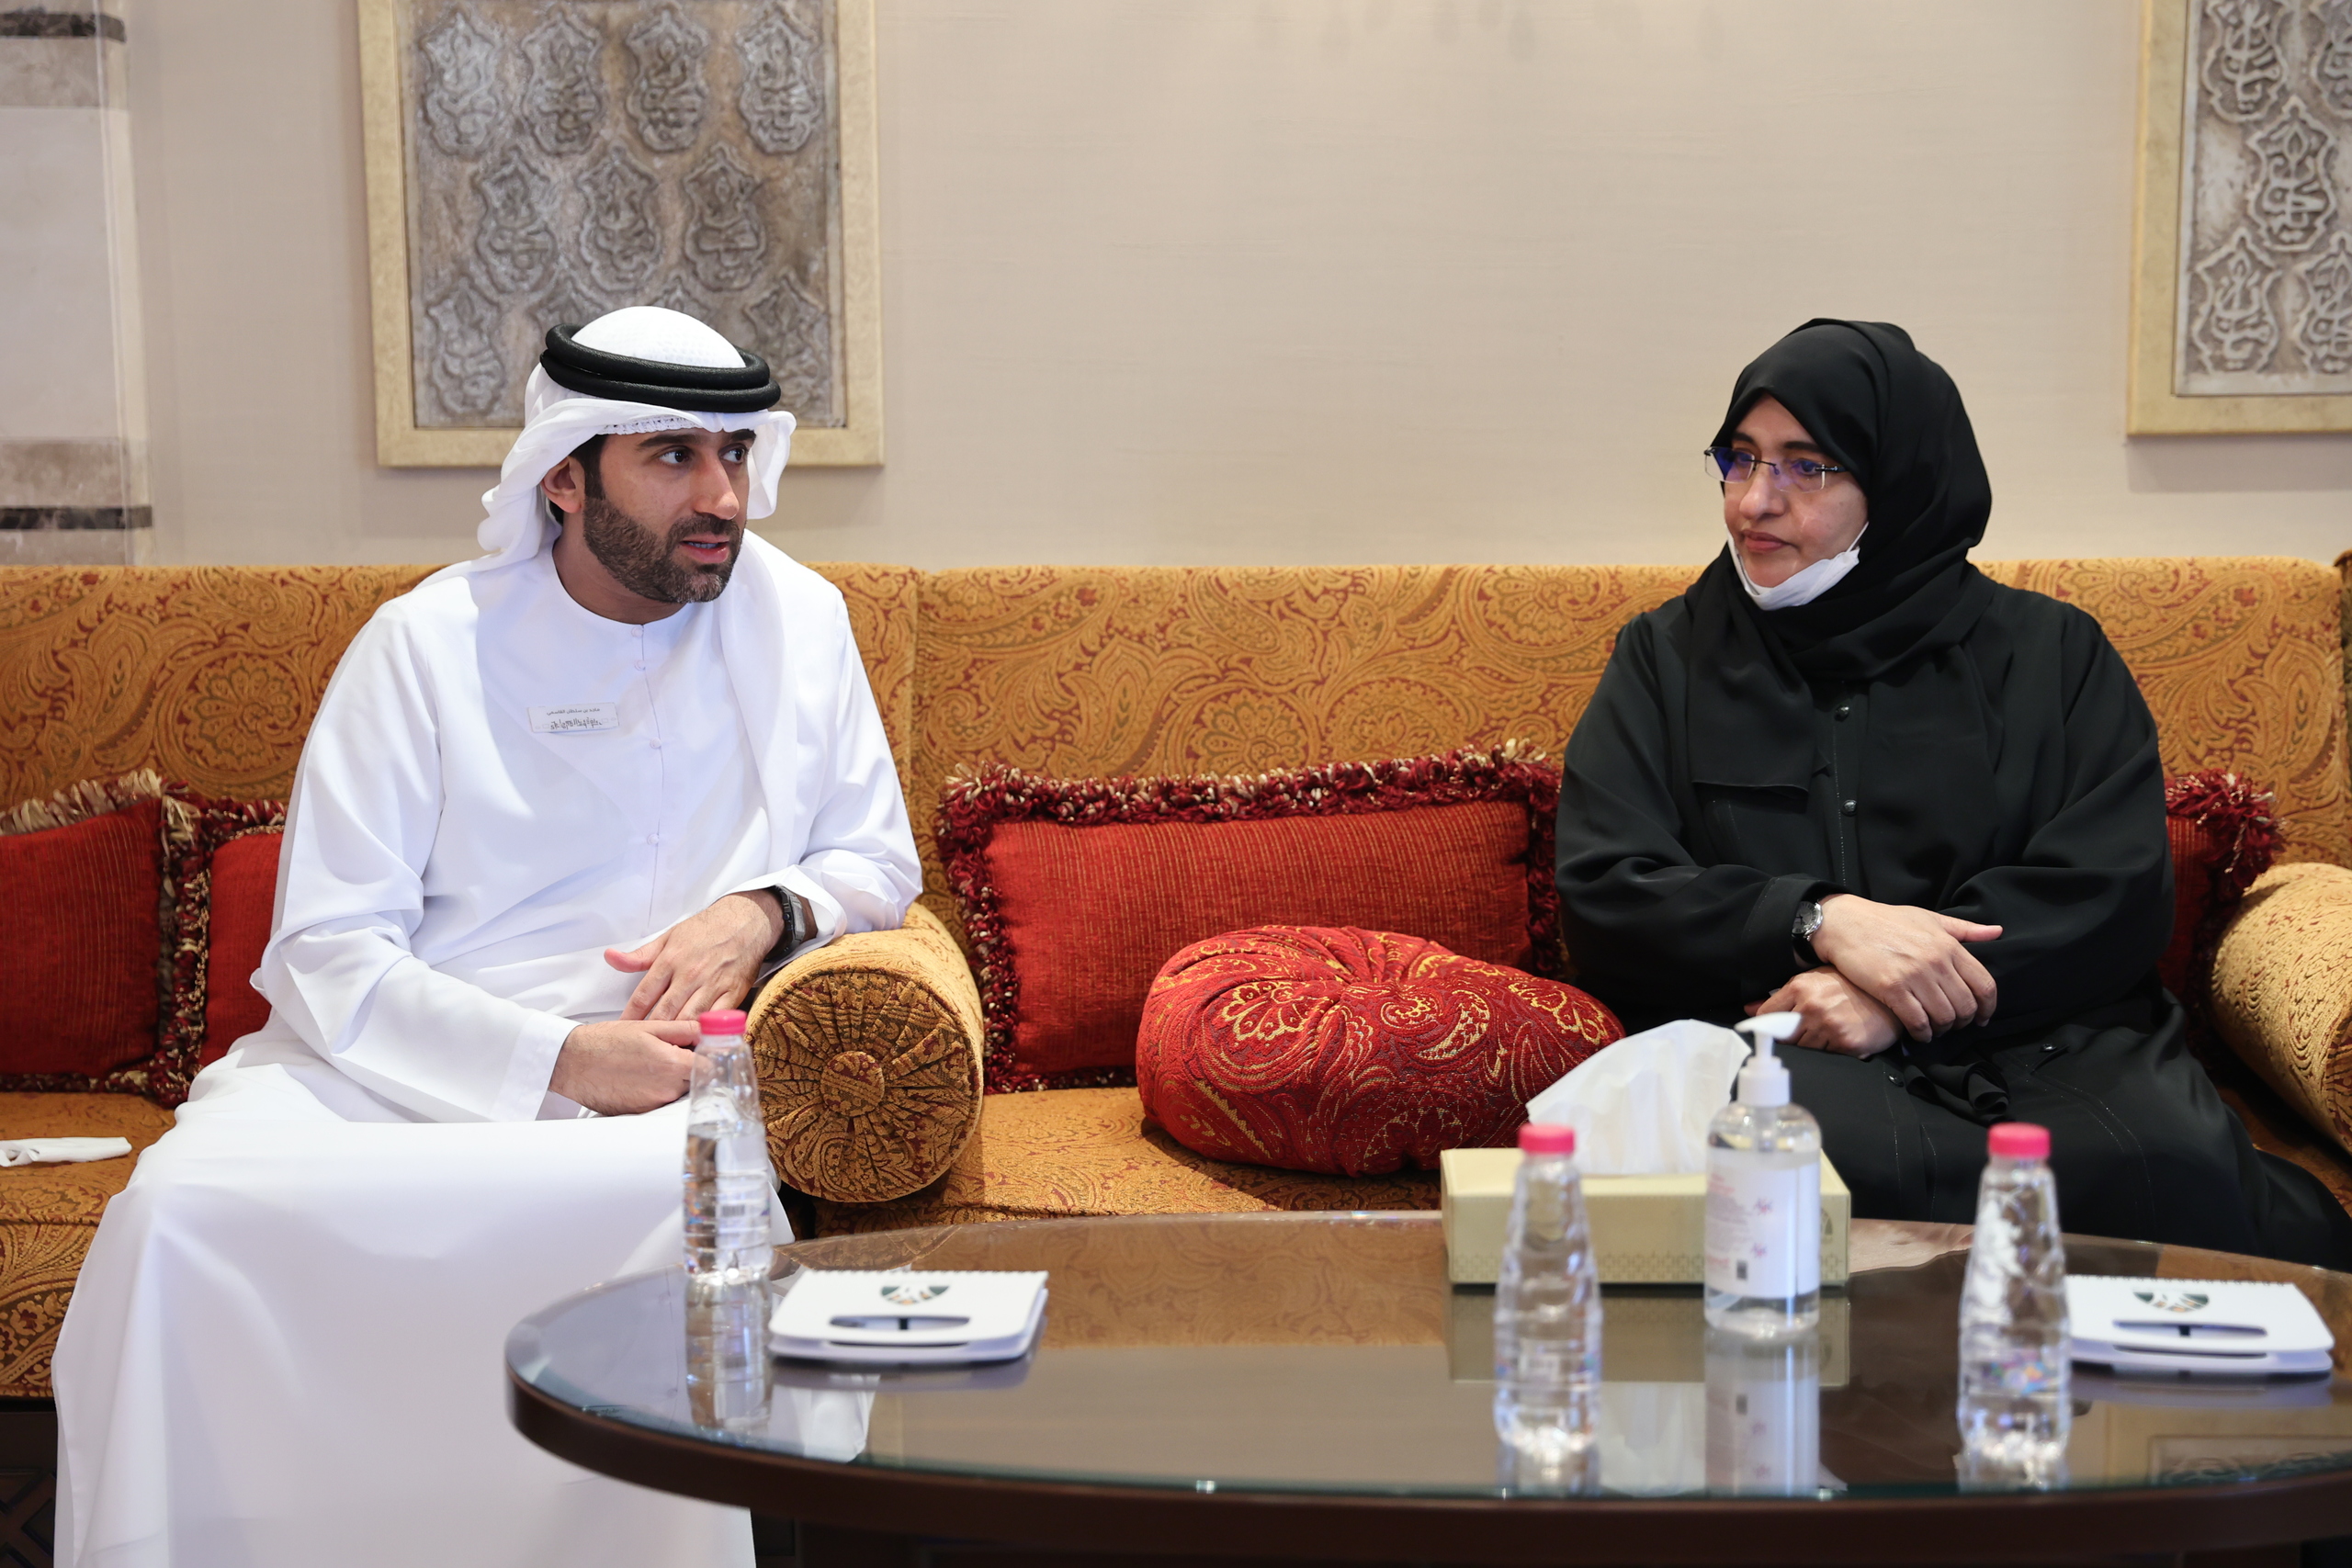 Suburb Affairs and the SCFA discuss promoting positive values